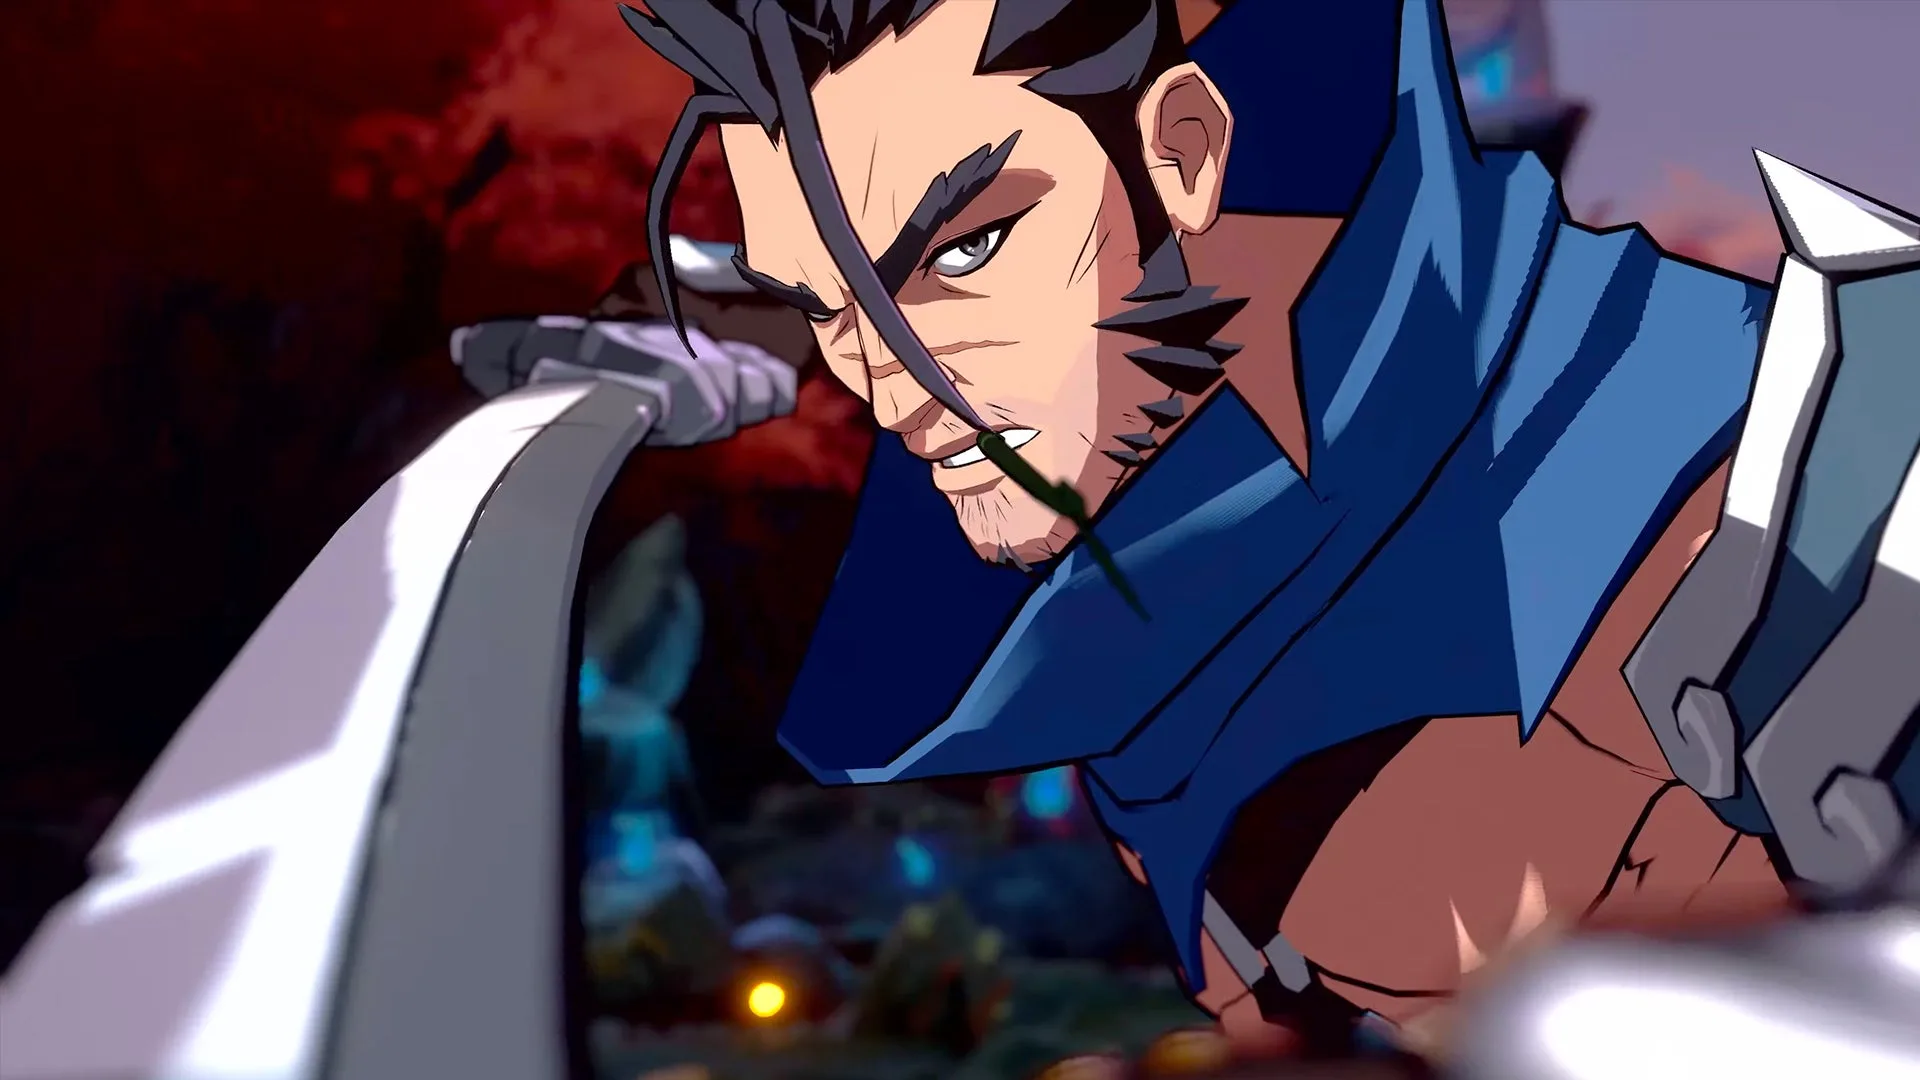 Project L, Riot’s Fighting Game Based on League of Legends, Reveals Yasuo as Its Fourth Character